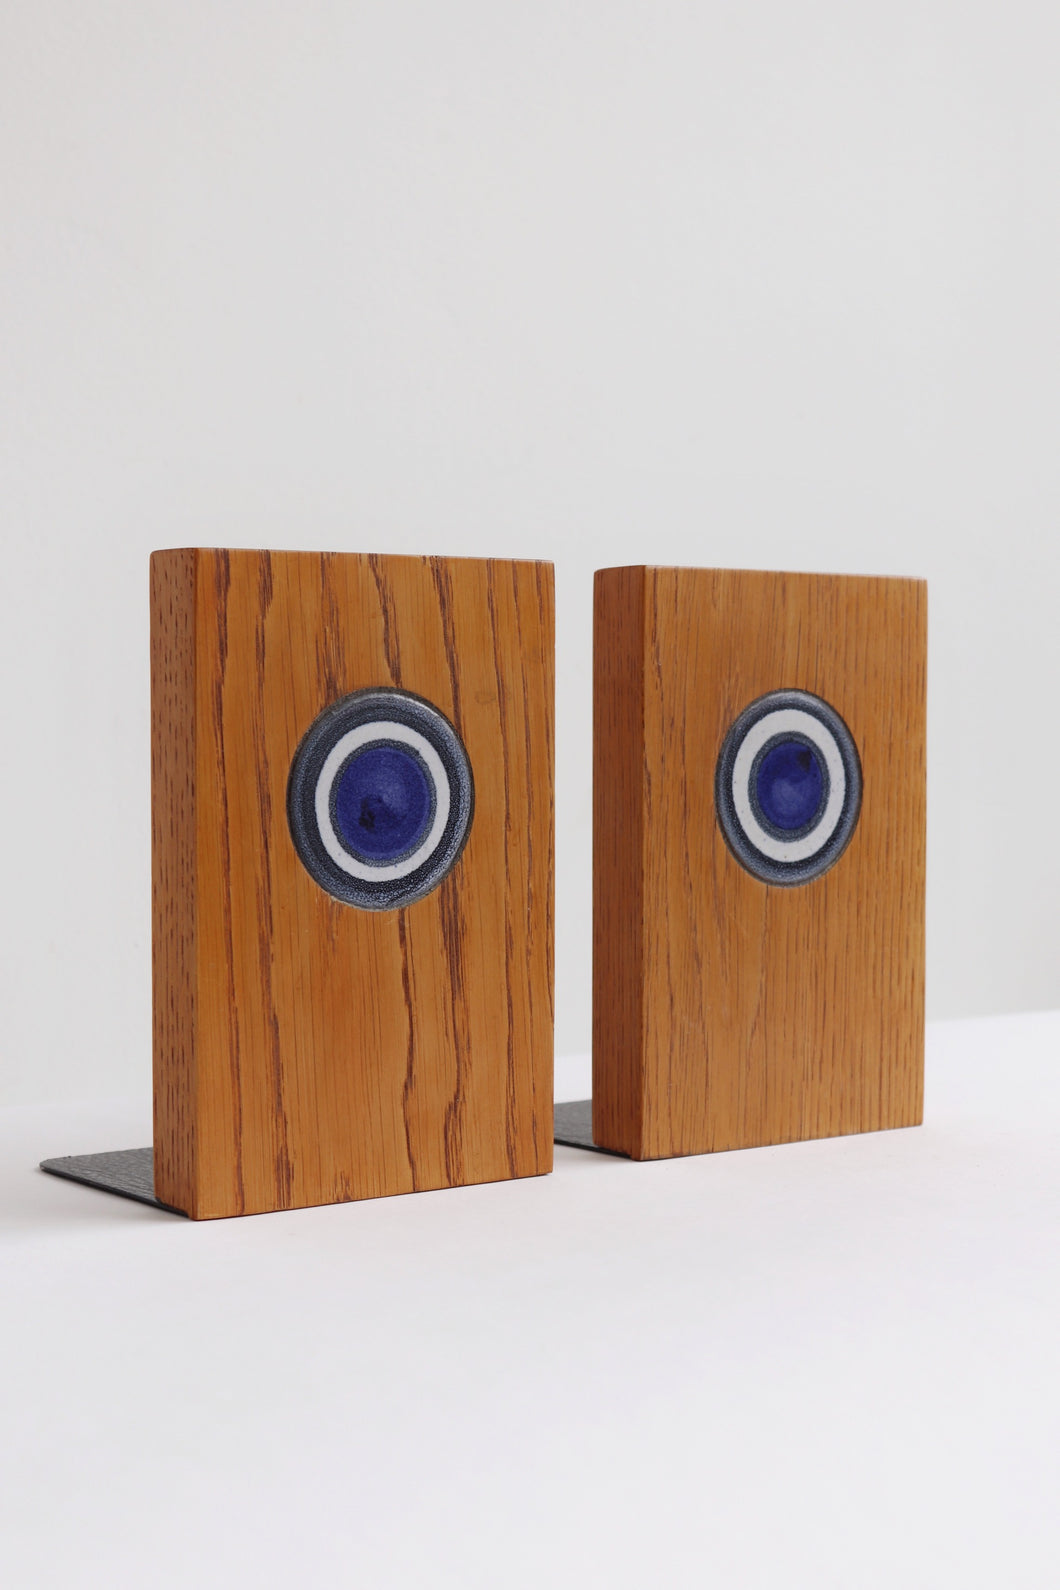 Martz Tile & Wood Bookends By Marshall Studios